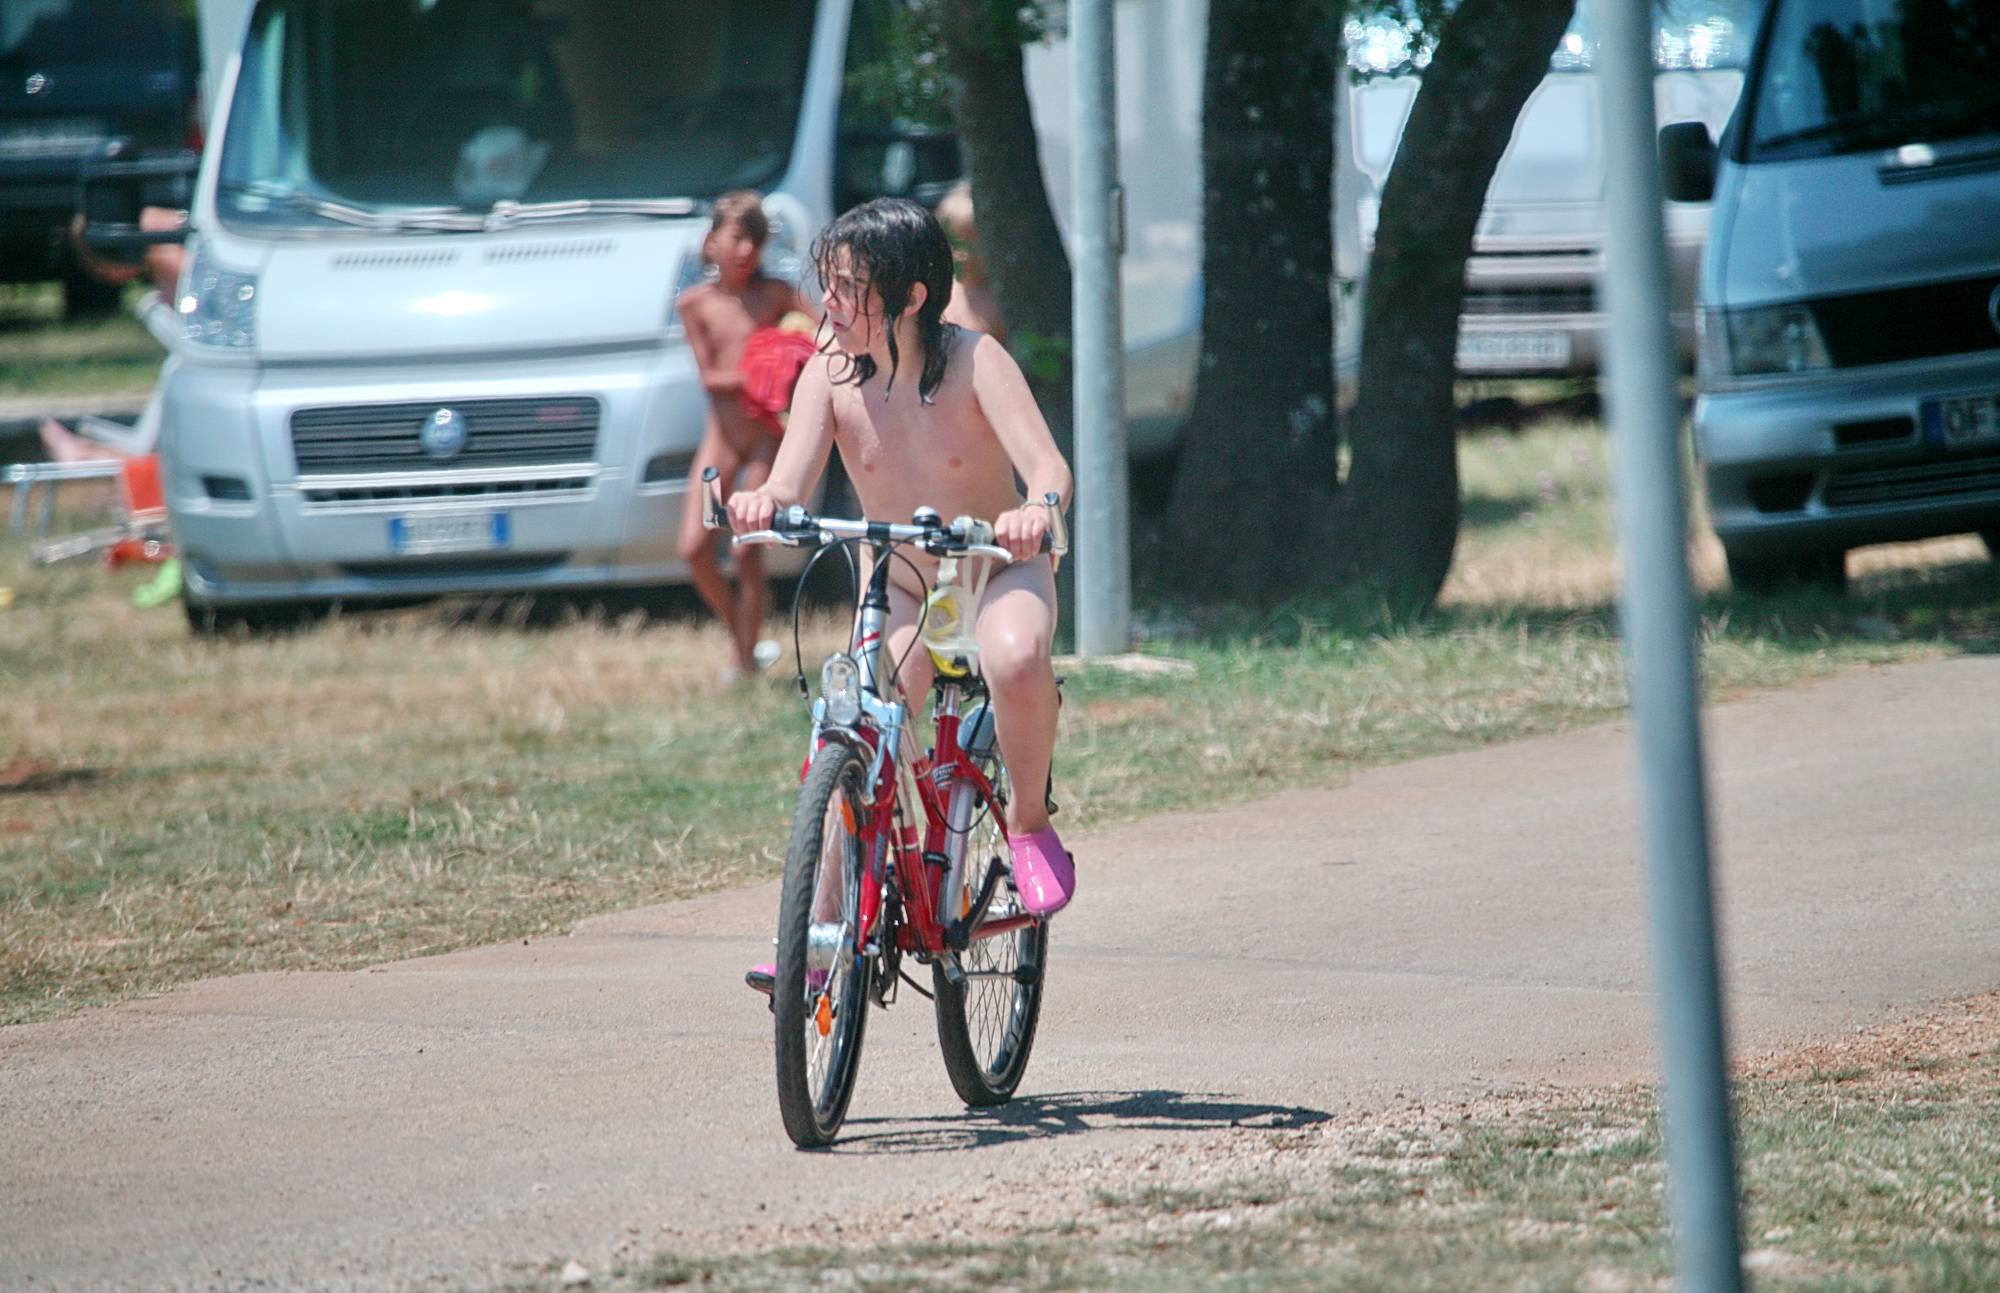 Nudist Pictures Outside Bike Profile Gall - 2